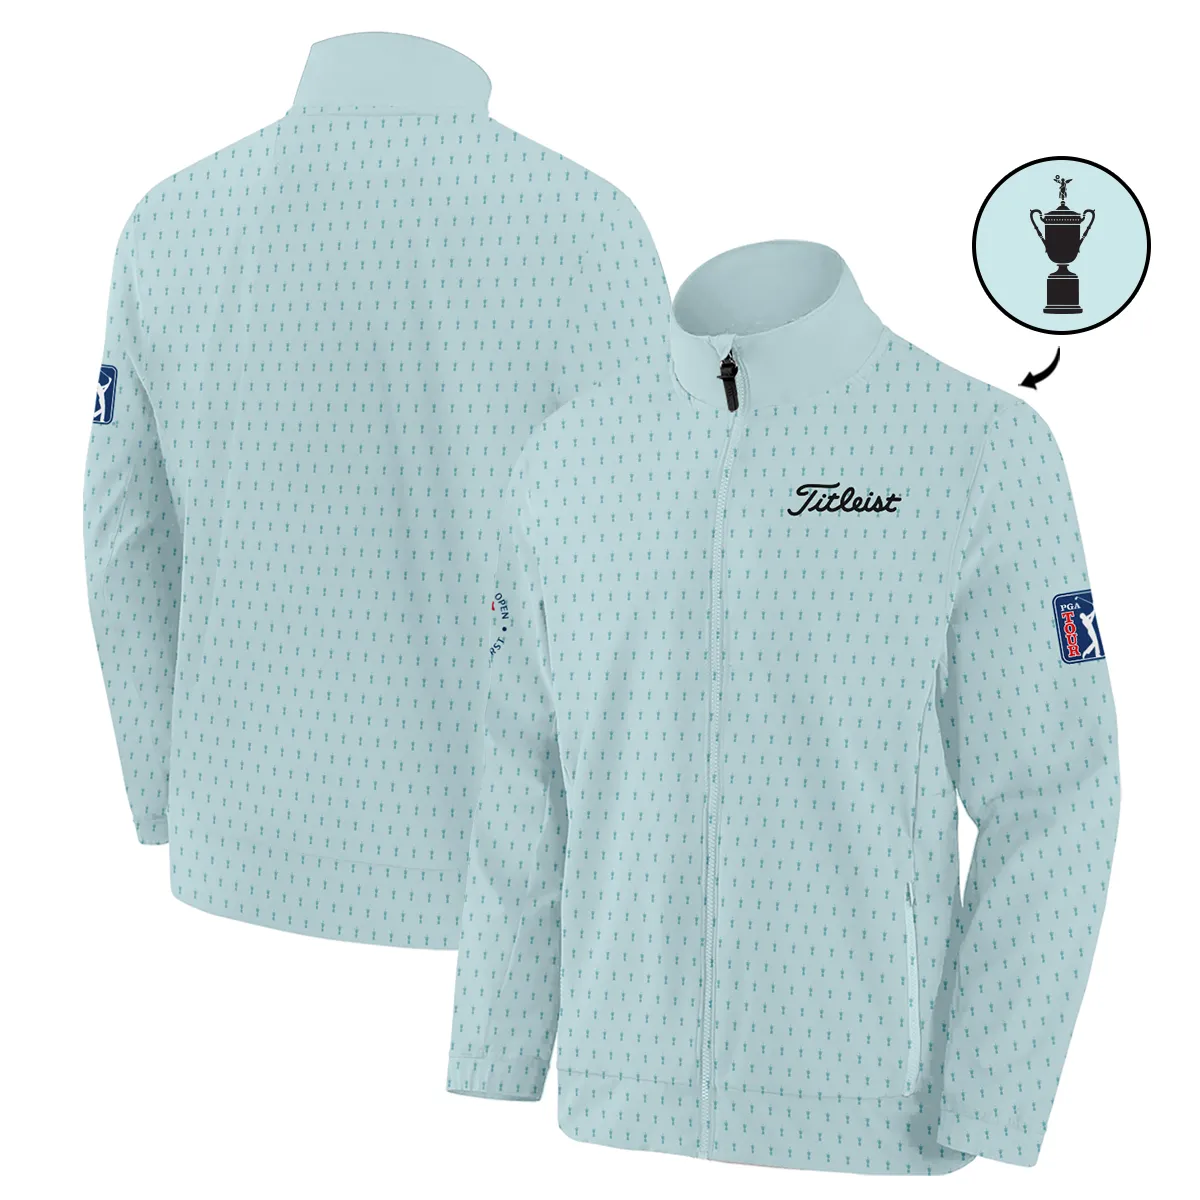 Sports 124th U.S. Open Titleist Pinehurst Stand Colar Jacket Cup Pattern Pastel Green All Over Print Stand Colar Jacket